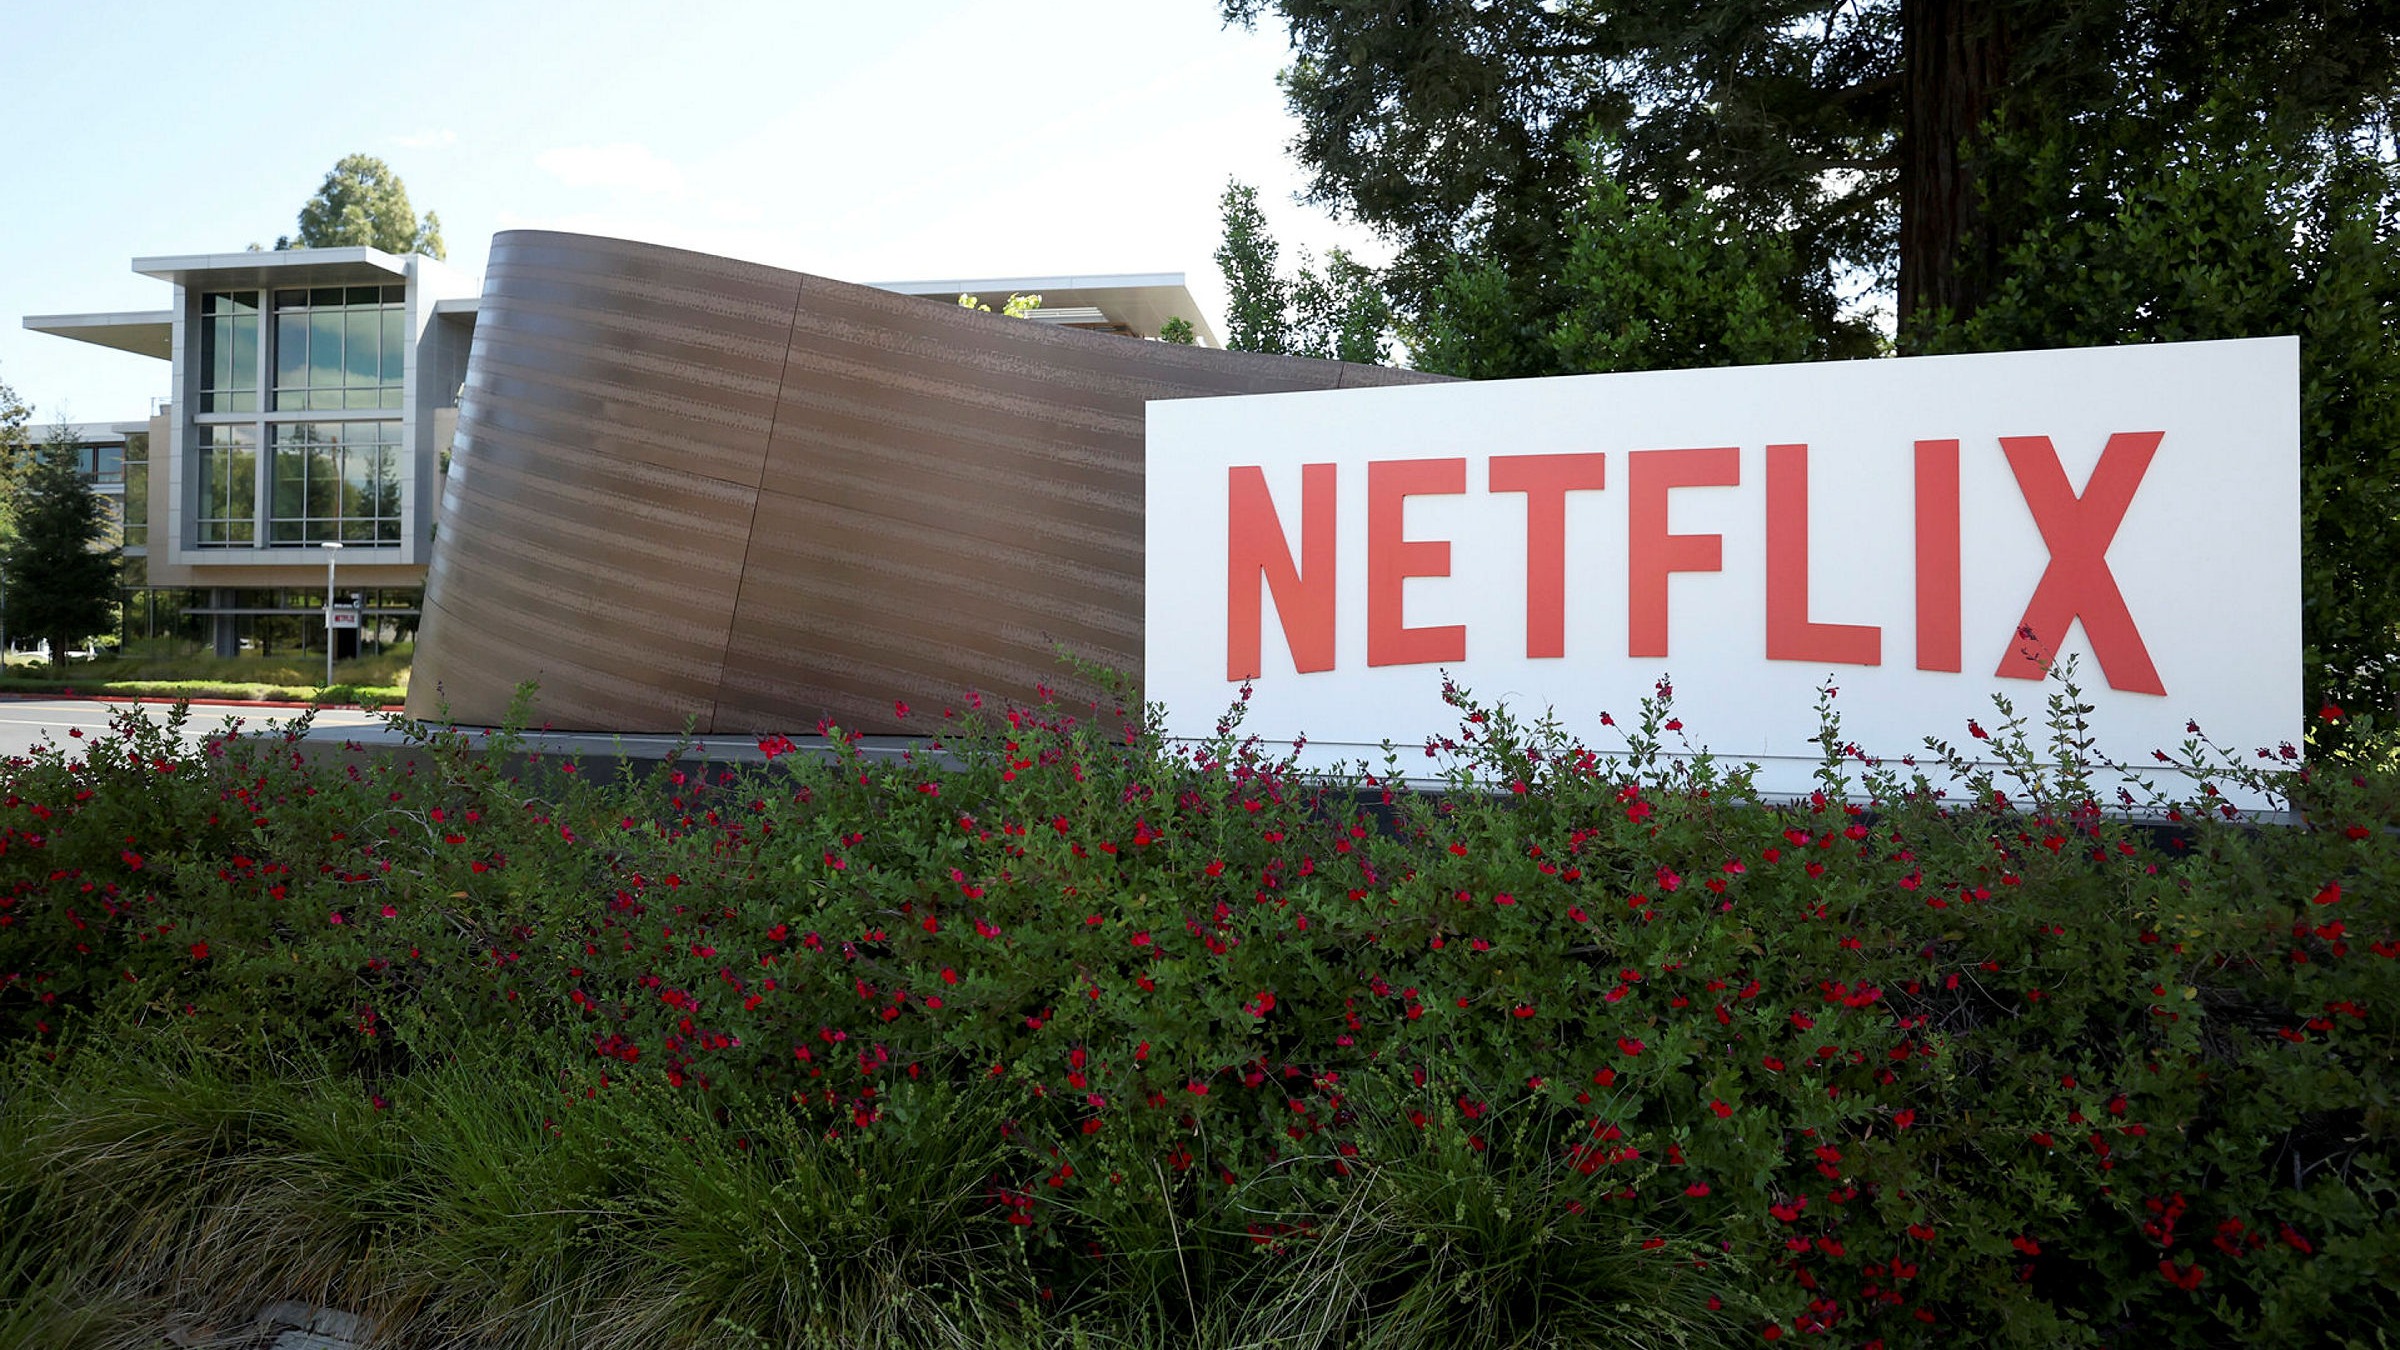 Live News Updates From April Netflix Plunges 35 On Subscriber Growth Warning Ukraine Blames Russia For Failed Mariupol Evacuation Financial Times